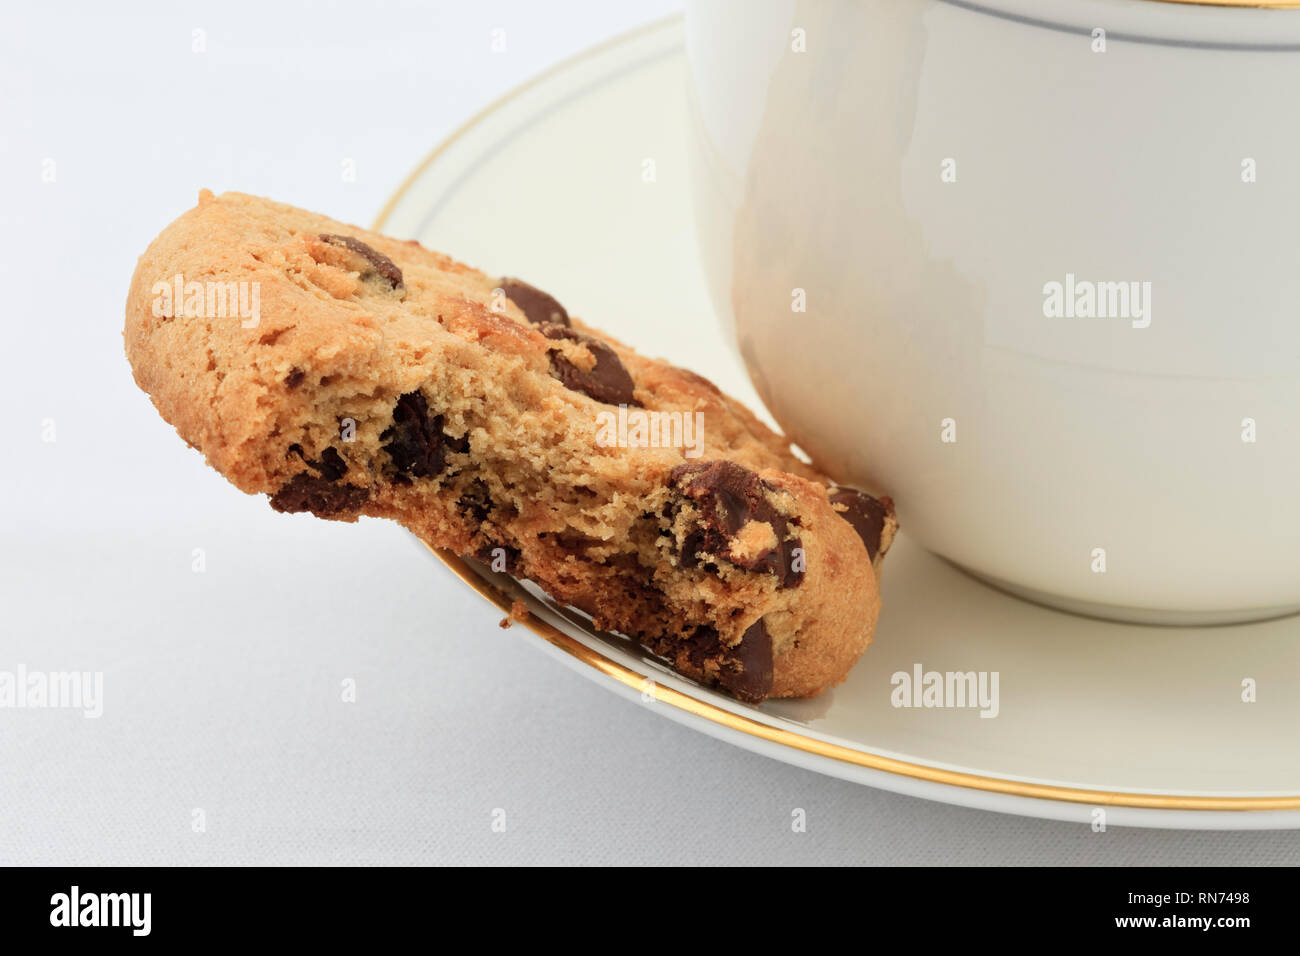 Cup of English tea on a saucer and a chocolate chip biscuit with a bite taken out. England UK Britain Stock Photo